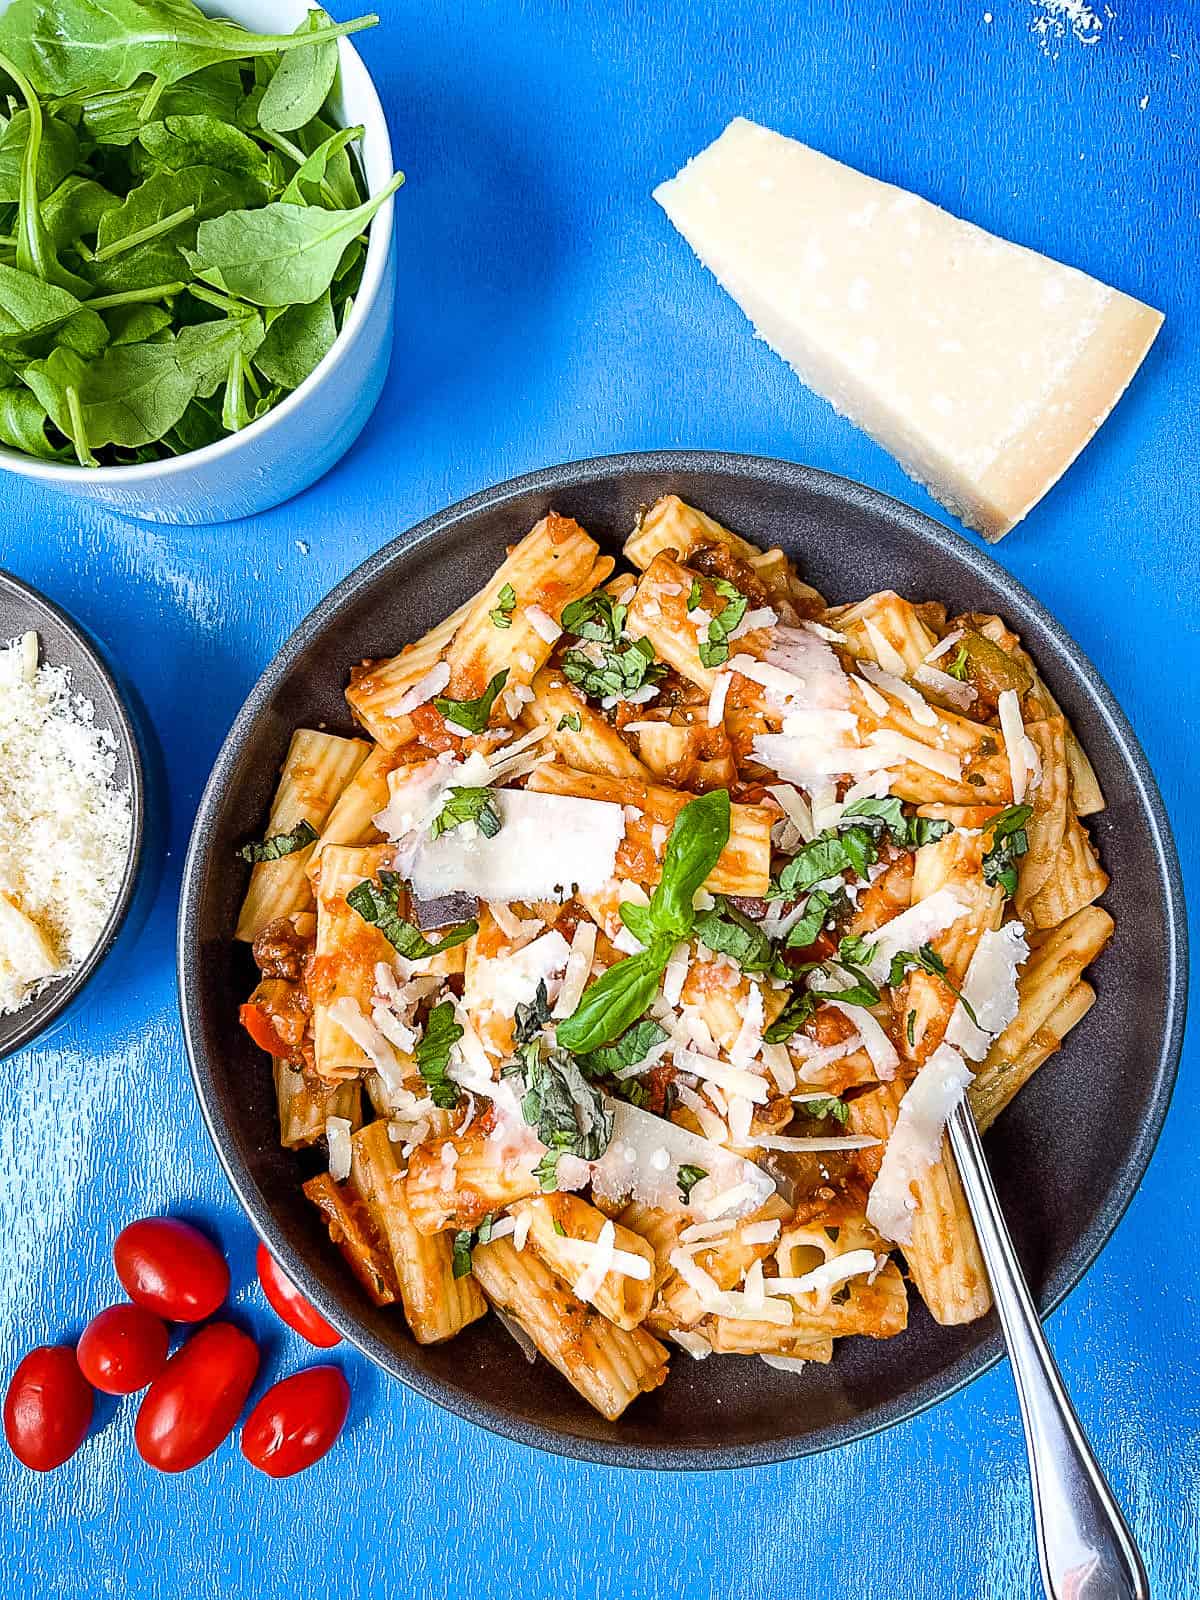 bowl of passata pasta sauce with mediterranean vegetables topped with grated parmesan cheese